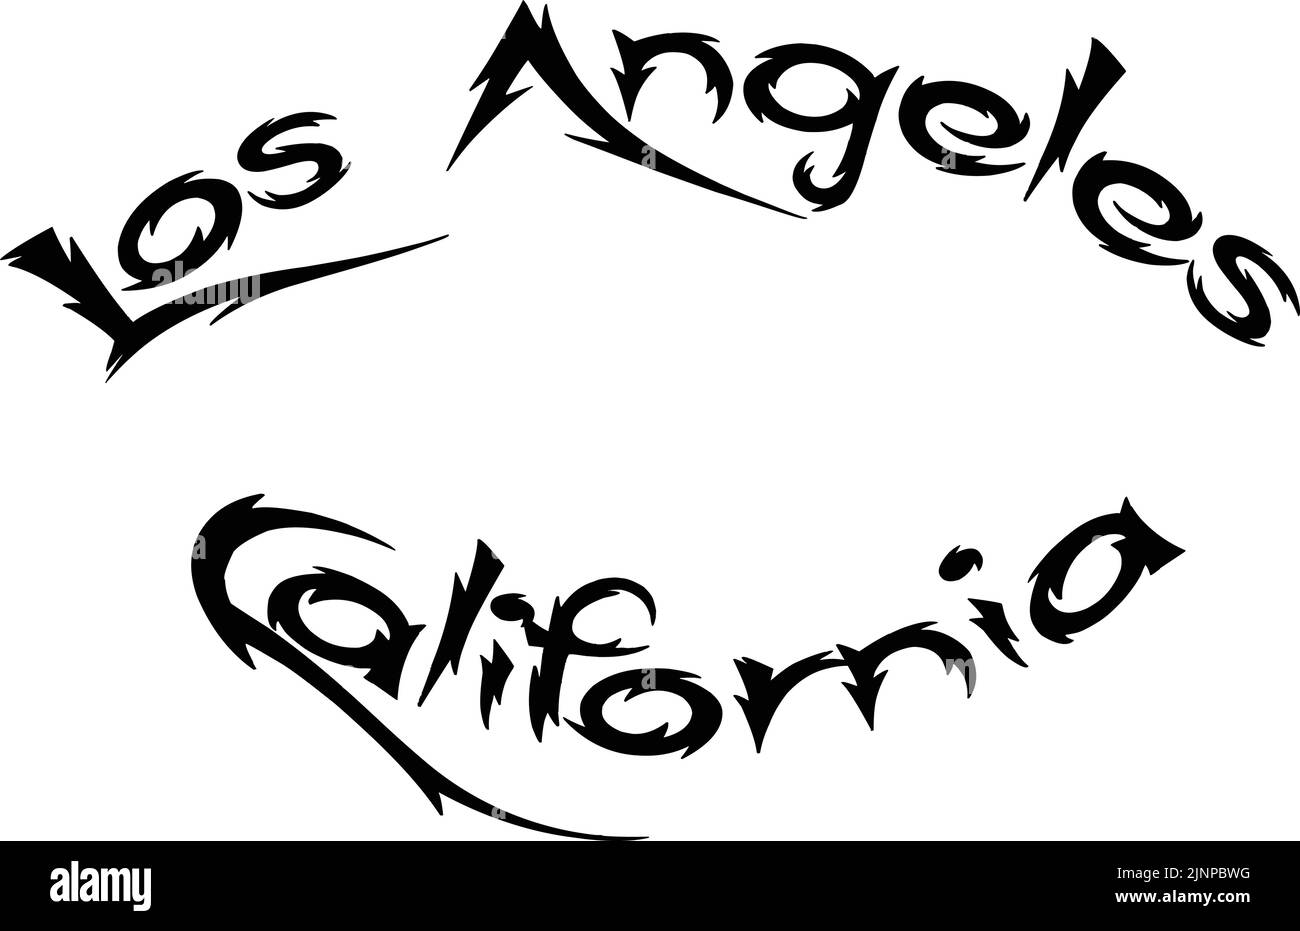 Los Angeles California, text sign illustration on white background. Stock Vector